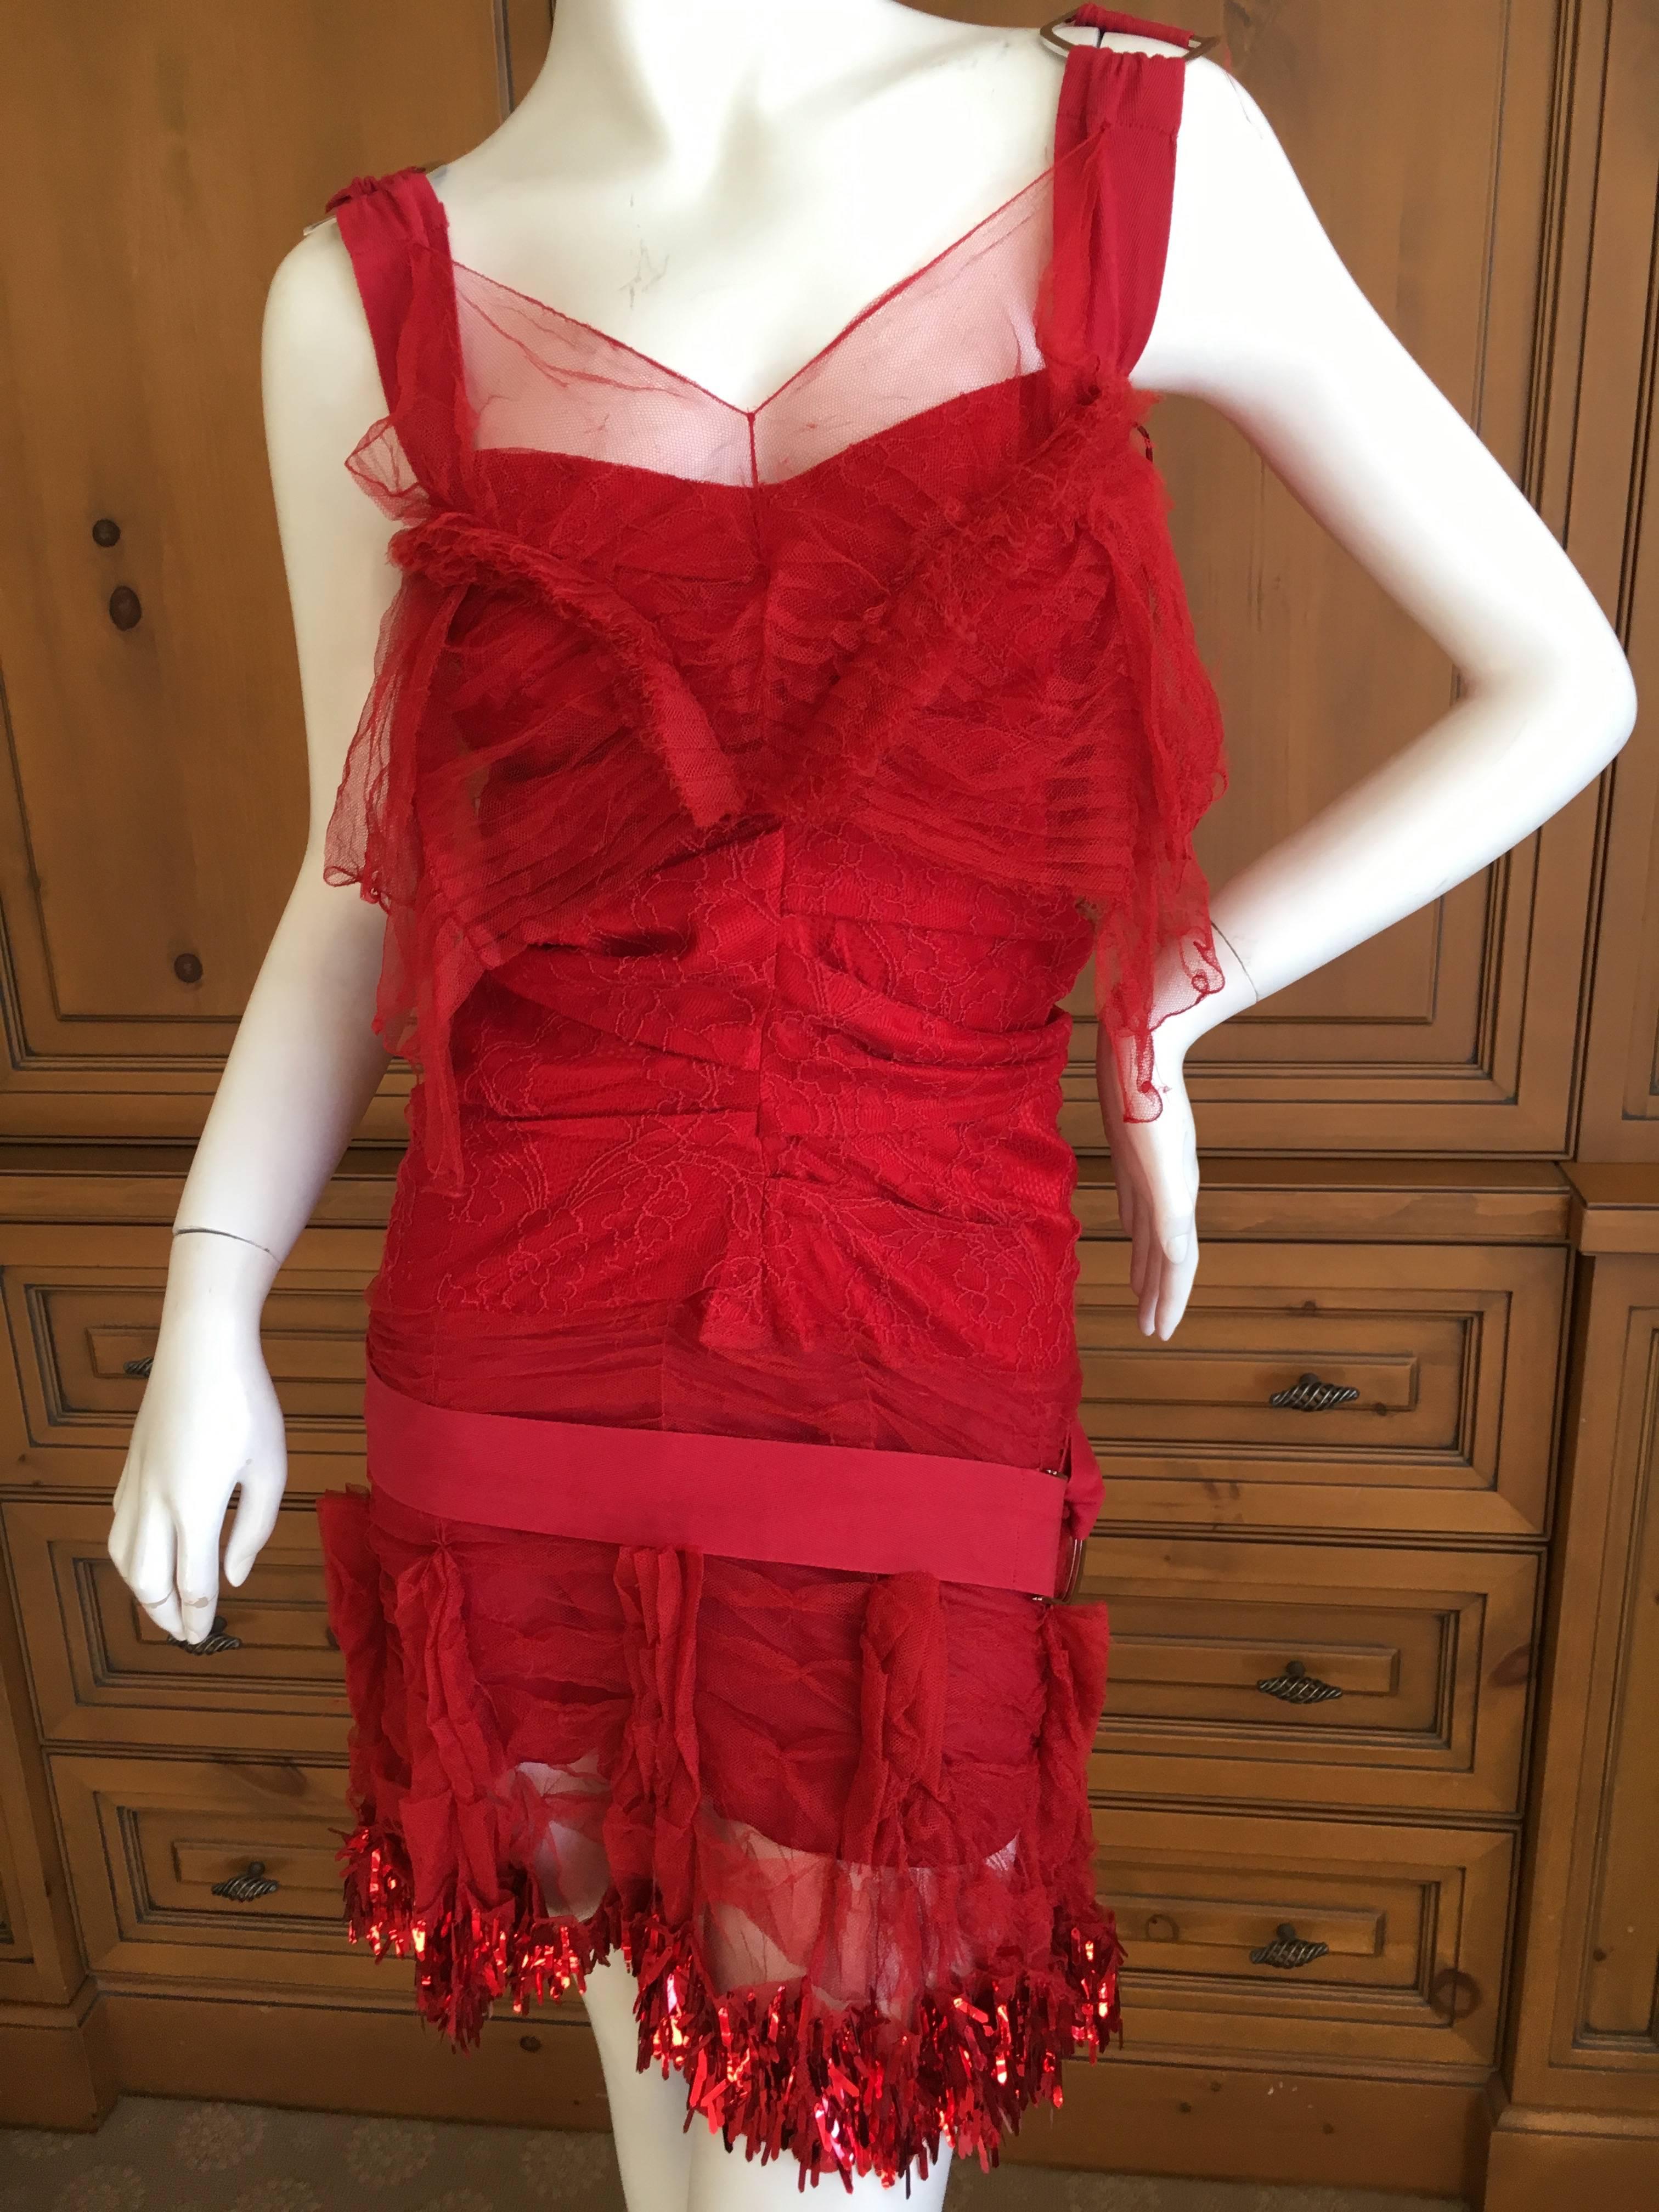 Dior by Galliano Sequin Accented Red Lace Cocktail Dress with Bondage Straps 1